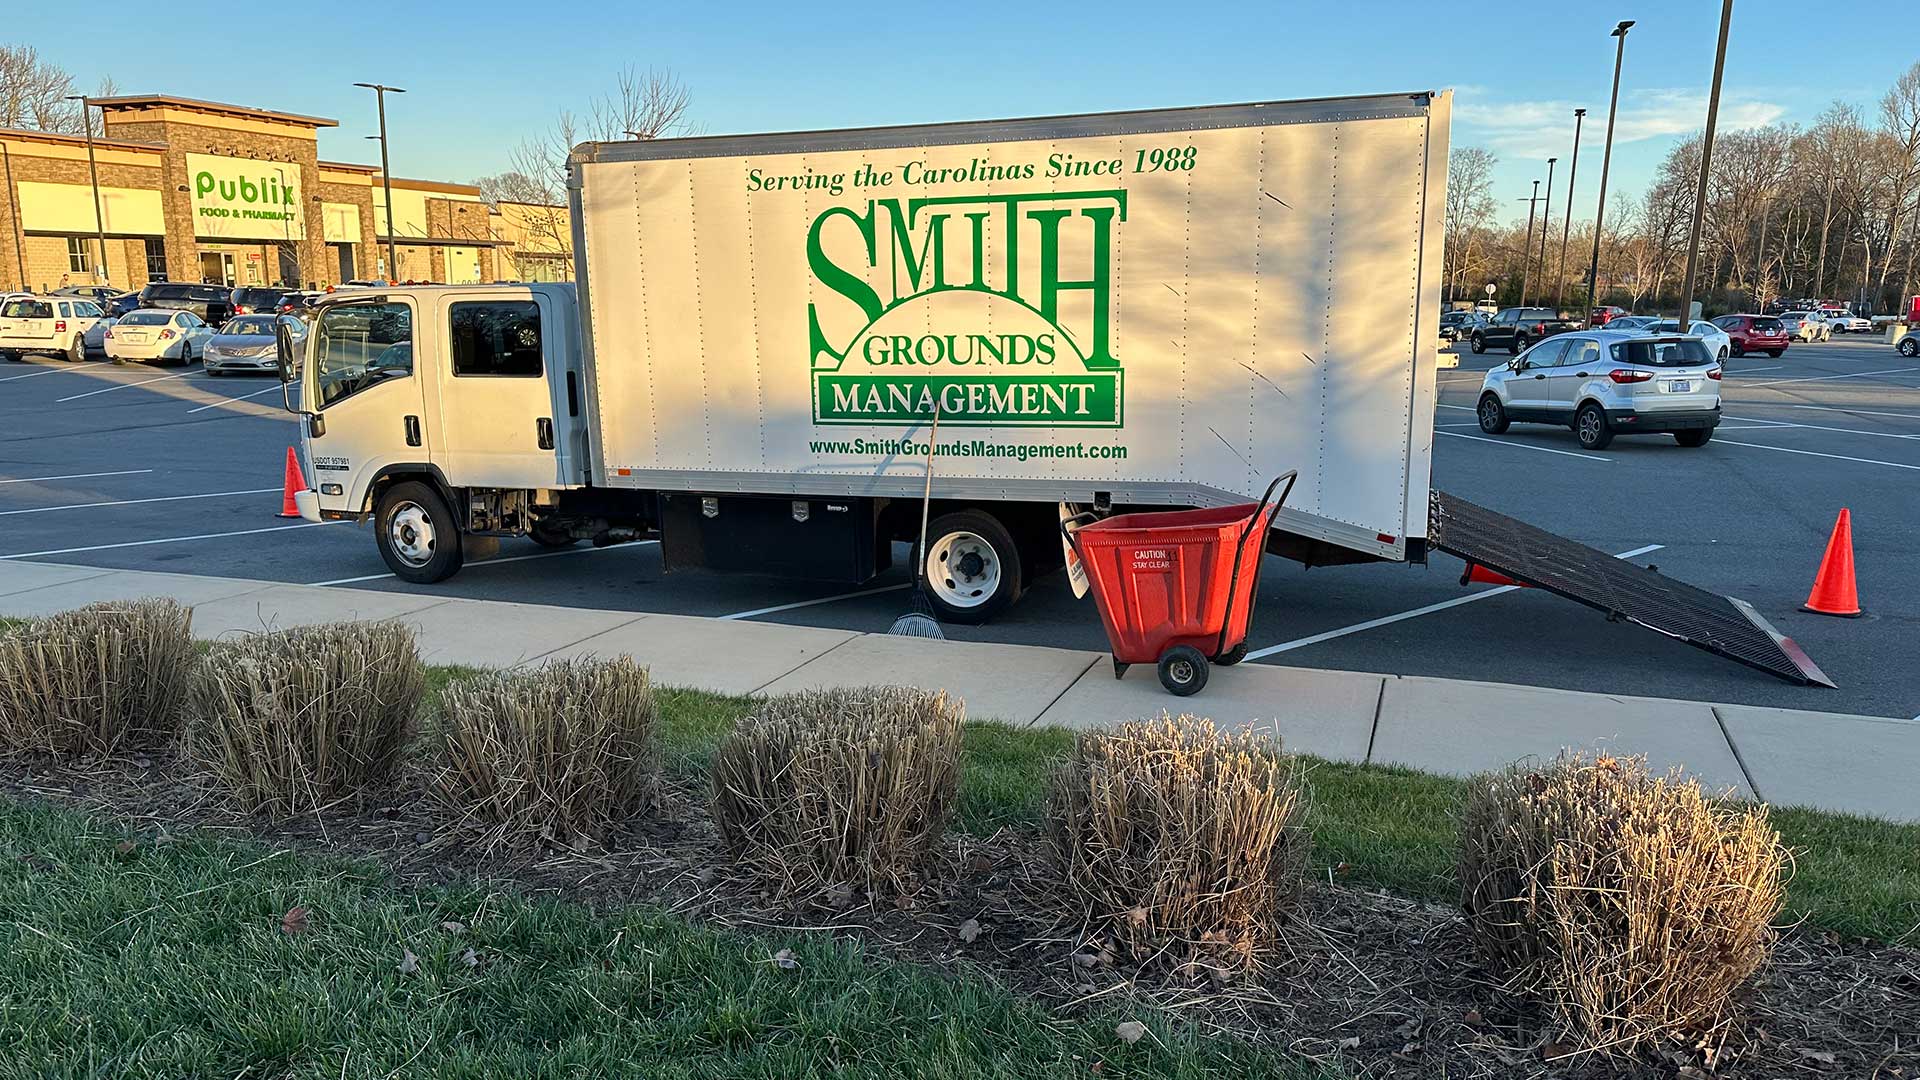 Smith Grounds Management landscaping truck in front of Publix in Charlotte, NC